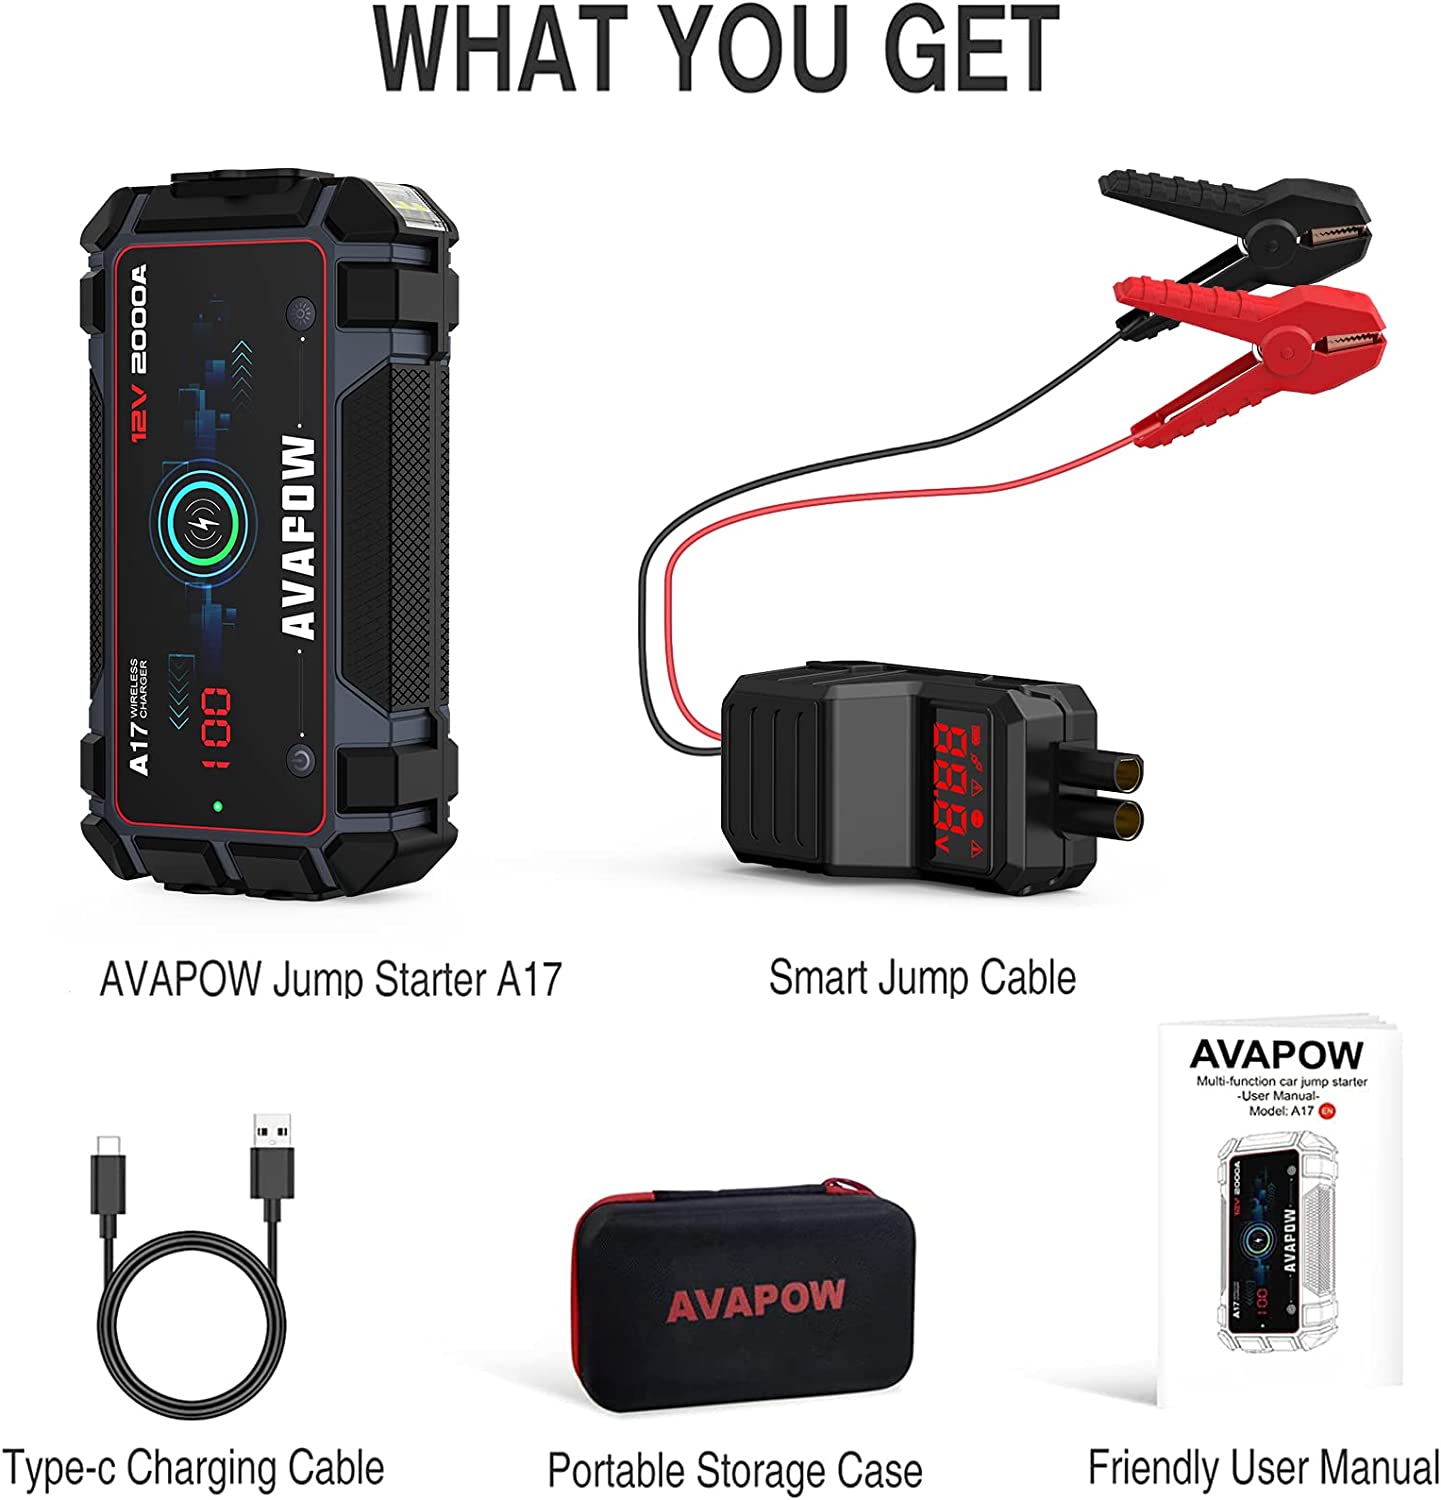  Car Jump Starter 3000A Peak Jump Boxes for Vehicles(12V 8L  Gas/6.5L Diesel Engine), Portable 20000mAh Power Bank, Equipped Fast  Charging Jump Starter Battery Pack : Automotive